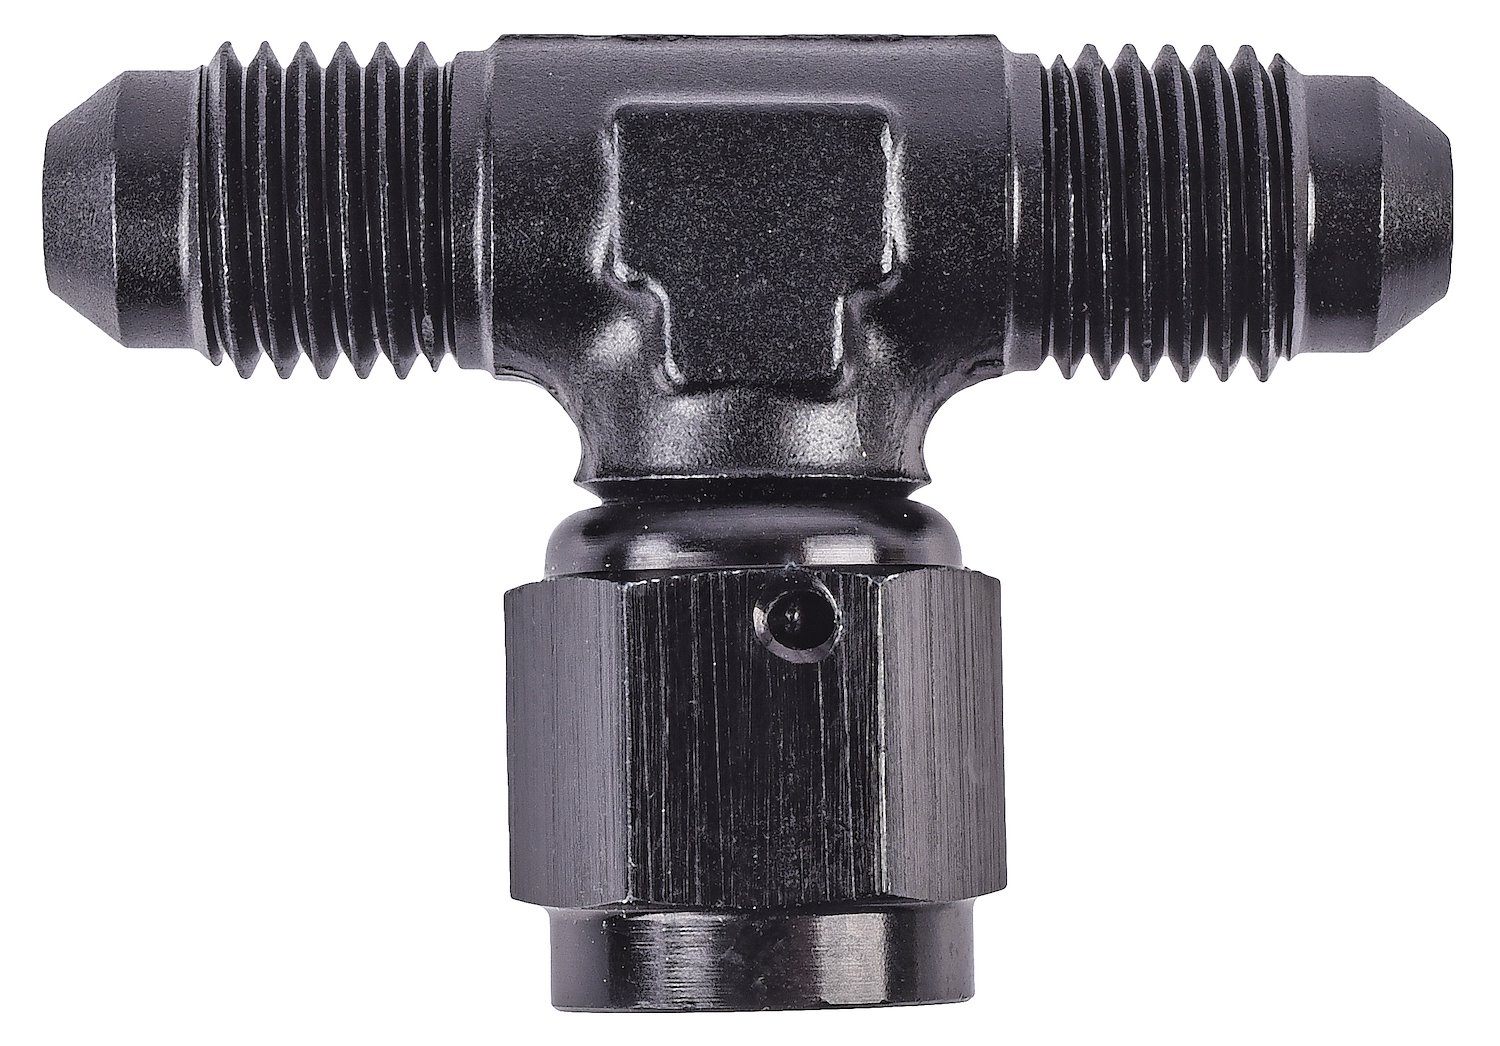 AN to AN Tee Adapter Fitting [-4 AN Male to -4 AN Male, -4 AN Female Swivel Center Port]